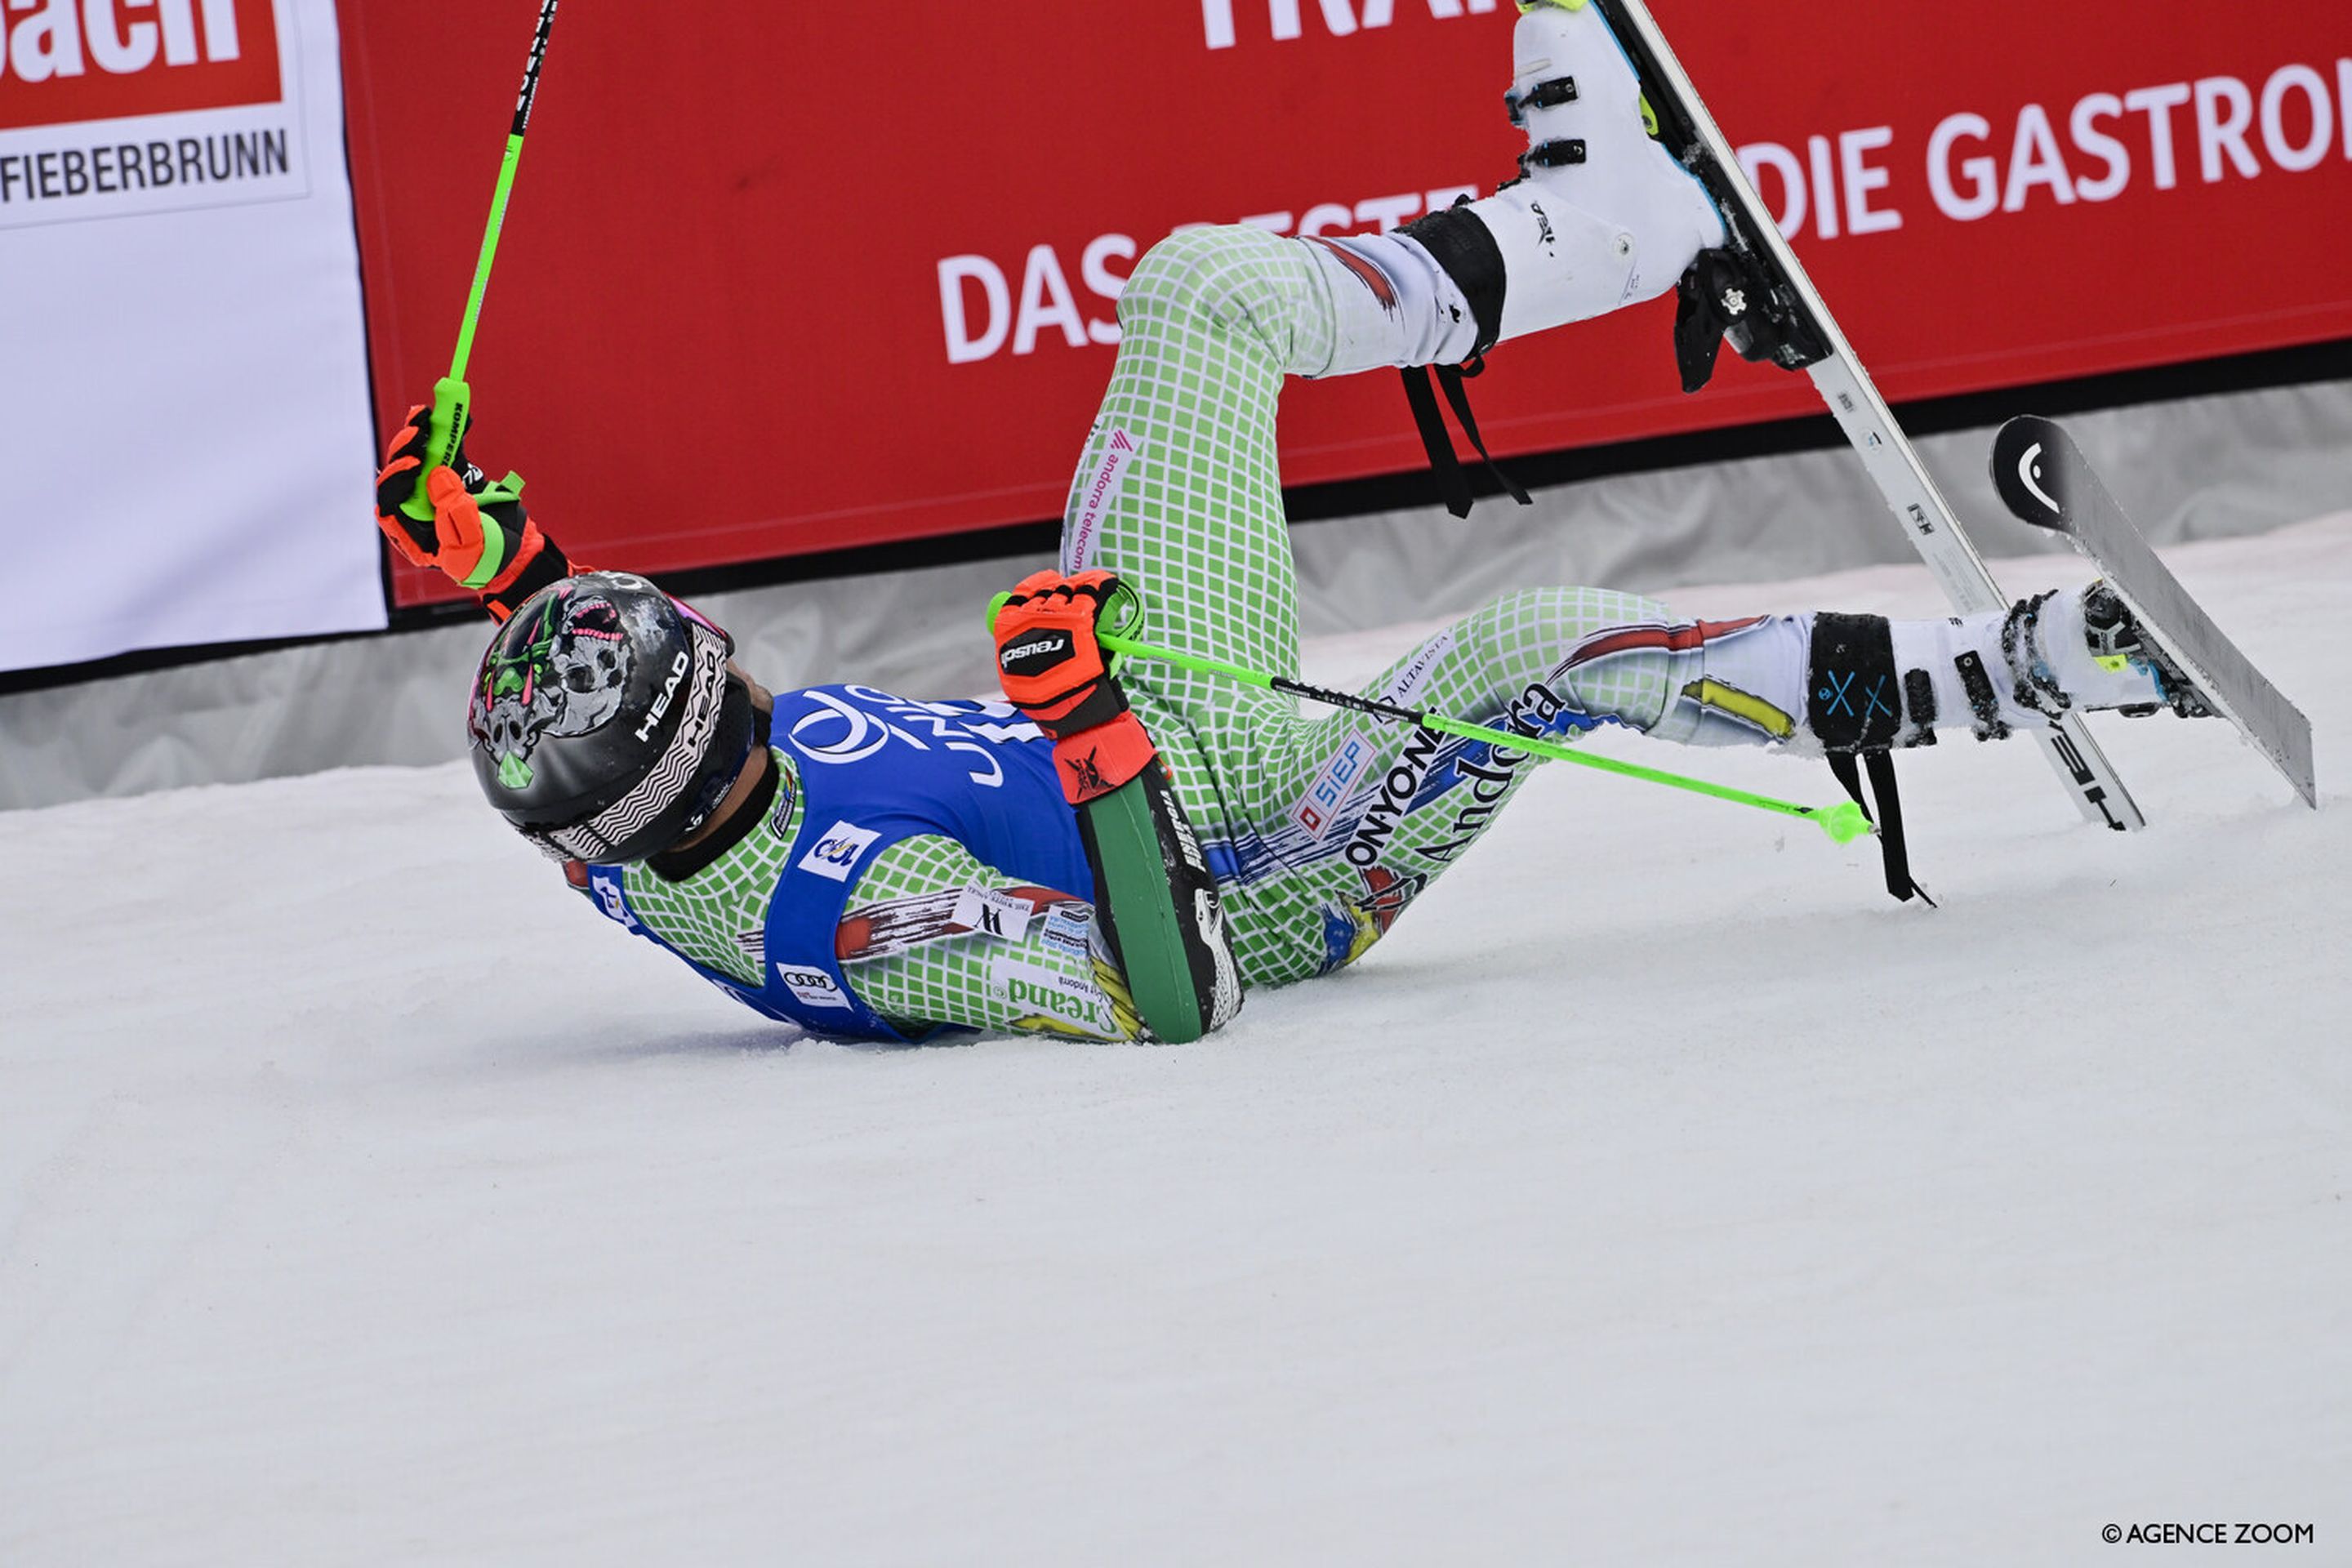 Joan Verdu (AND) rolls around in the snow in celebration after taking the lead